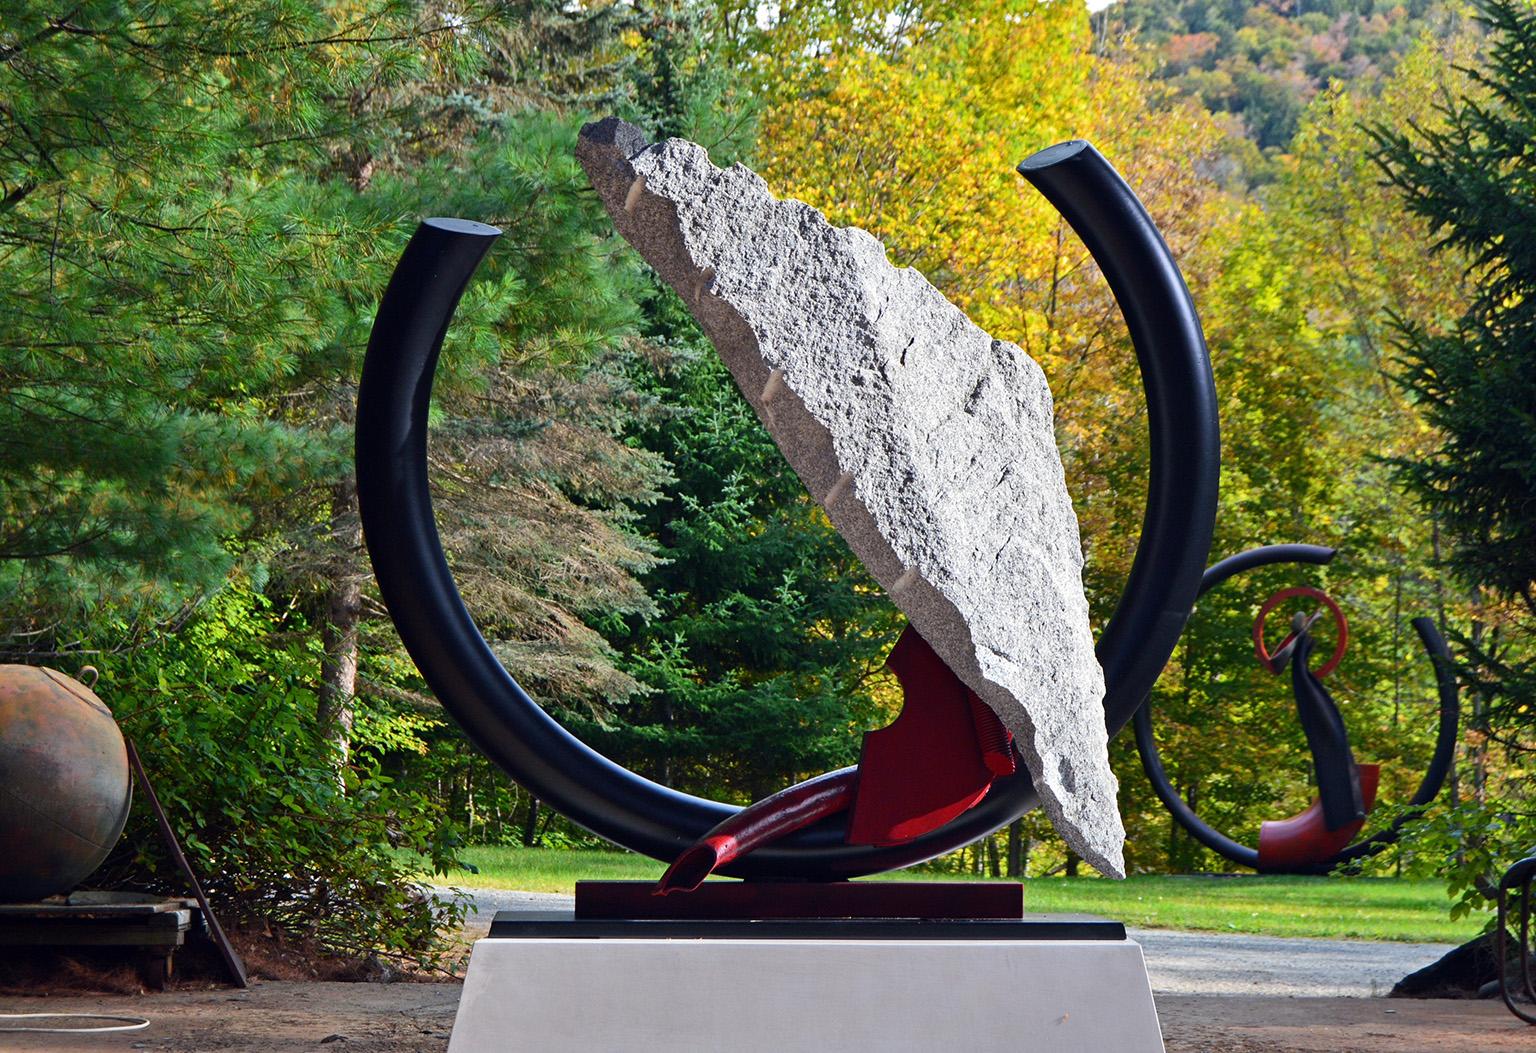 "Sisyphean Circle 8-14-17" by John Van Alstine
Granite, galvanized and powder-coated steel

The sculpture of John Van Alstine beautifully, and powerfully, balances the union of stone and metal, while exploring the relationship of the purely natural